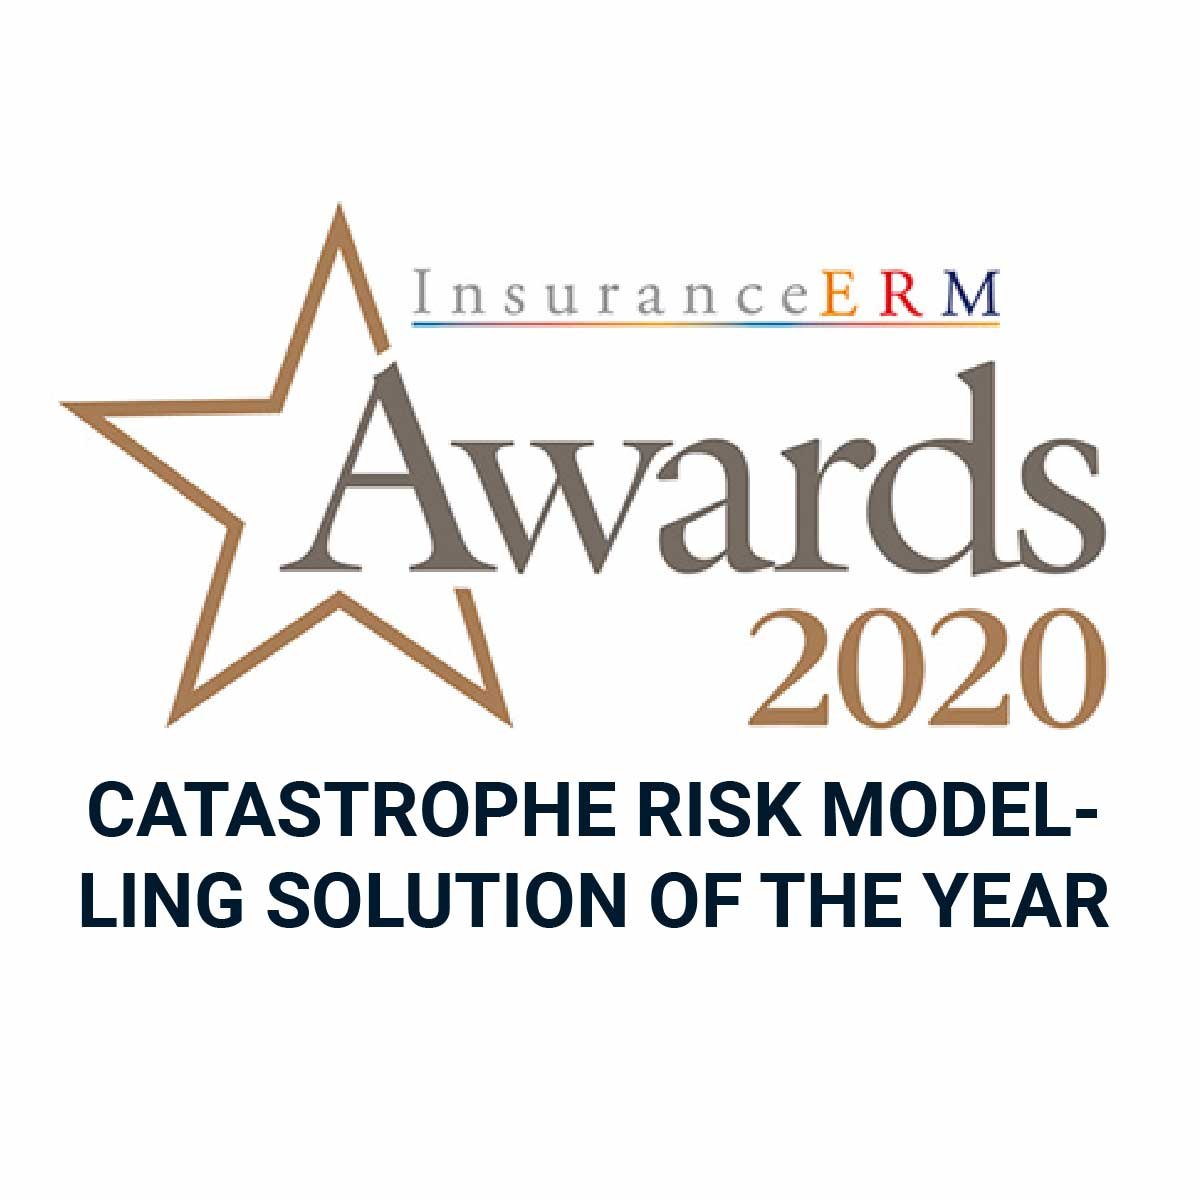 Catastrophe risk modelling solution of the year